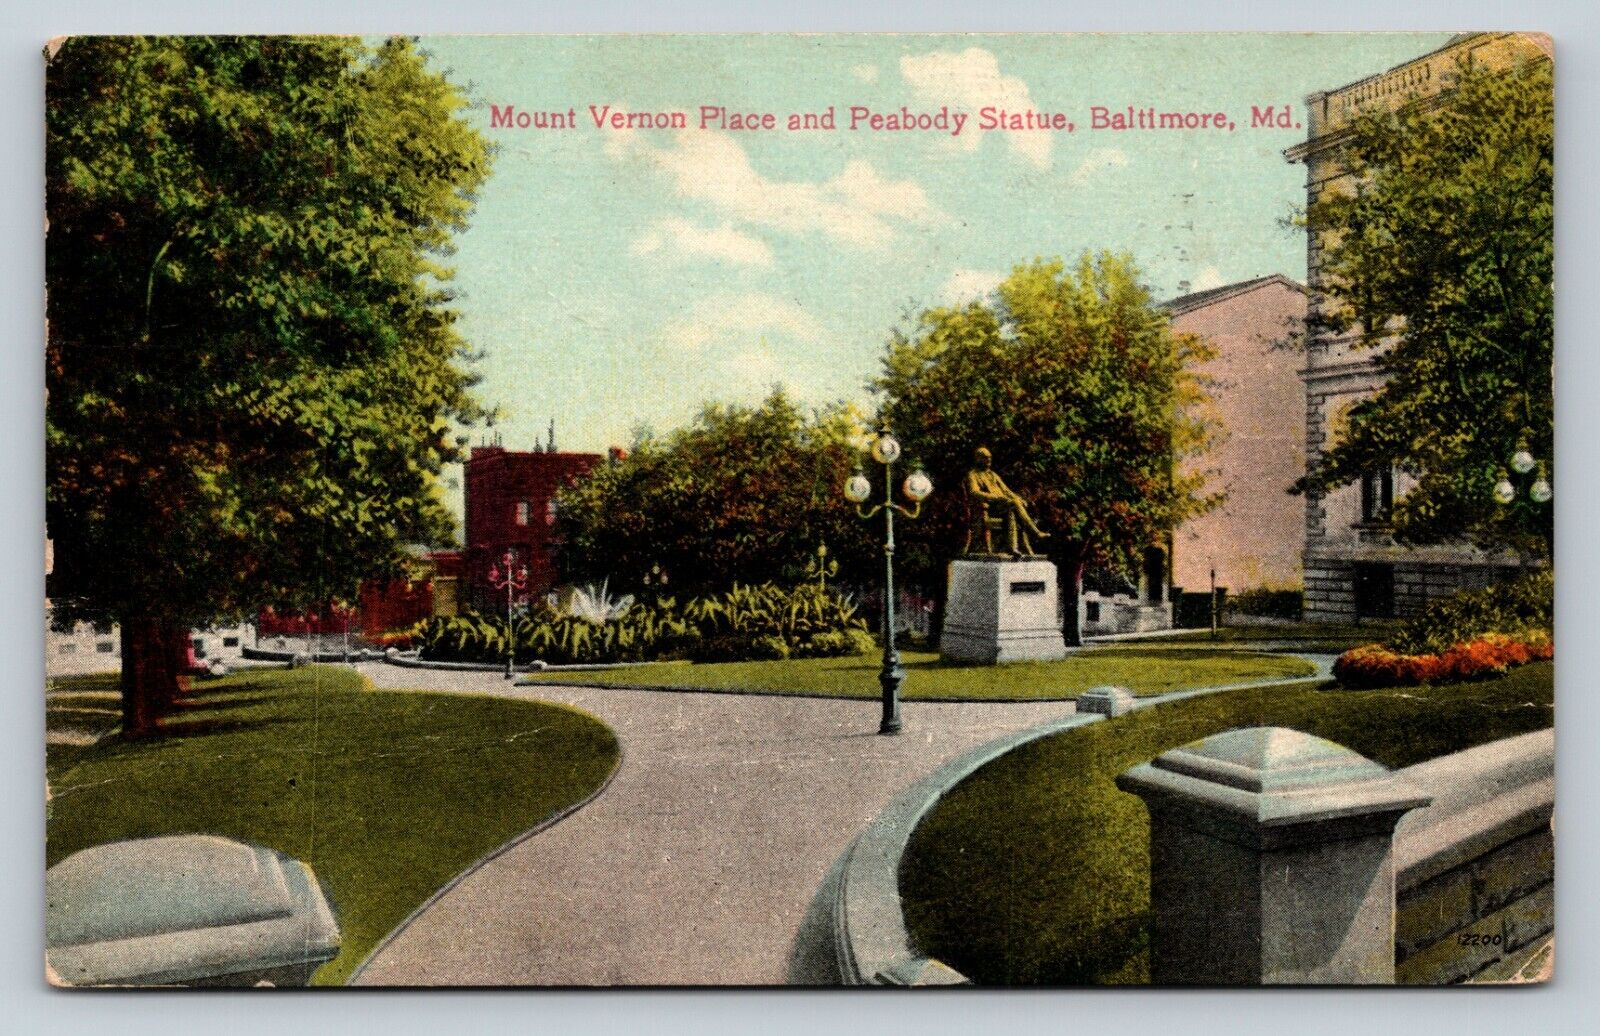 c1909 Baltimore Maryland MD Mount Vernon Place & Peabody Statue ANTIQUE Postcard